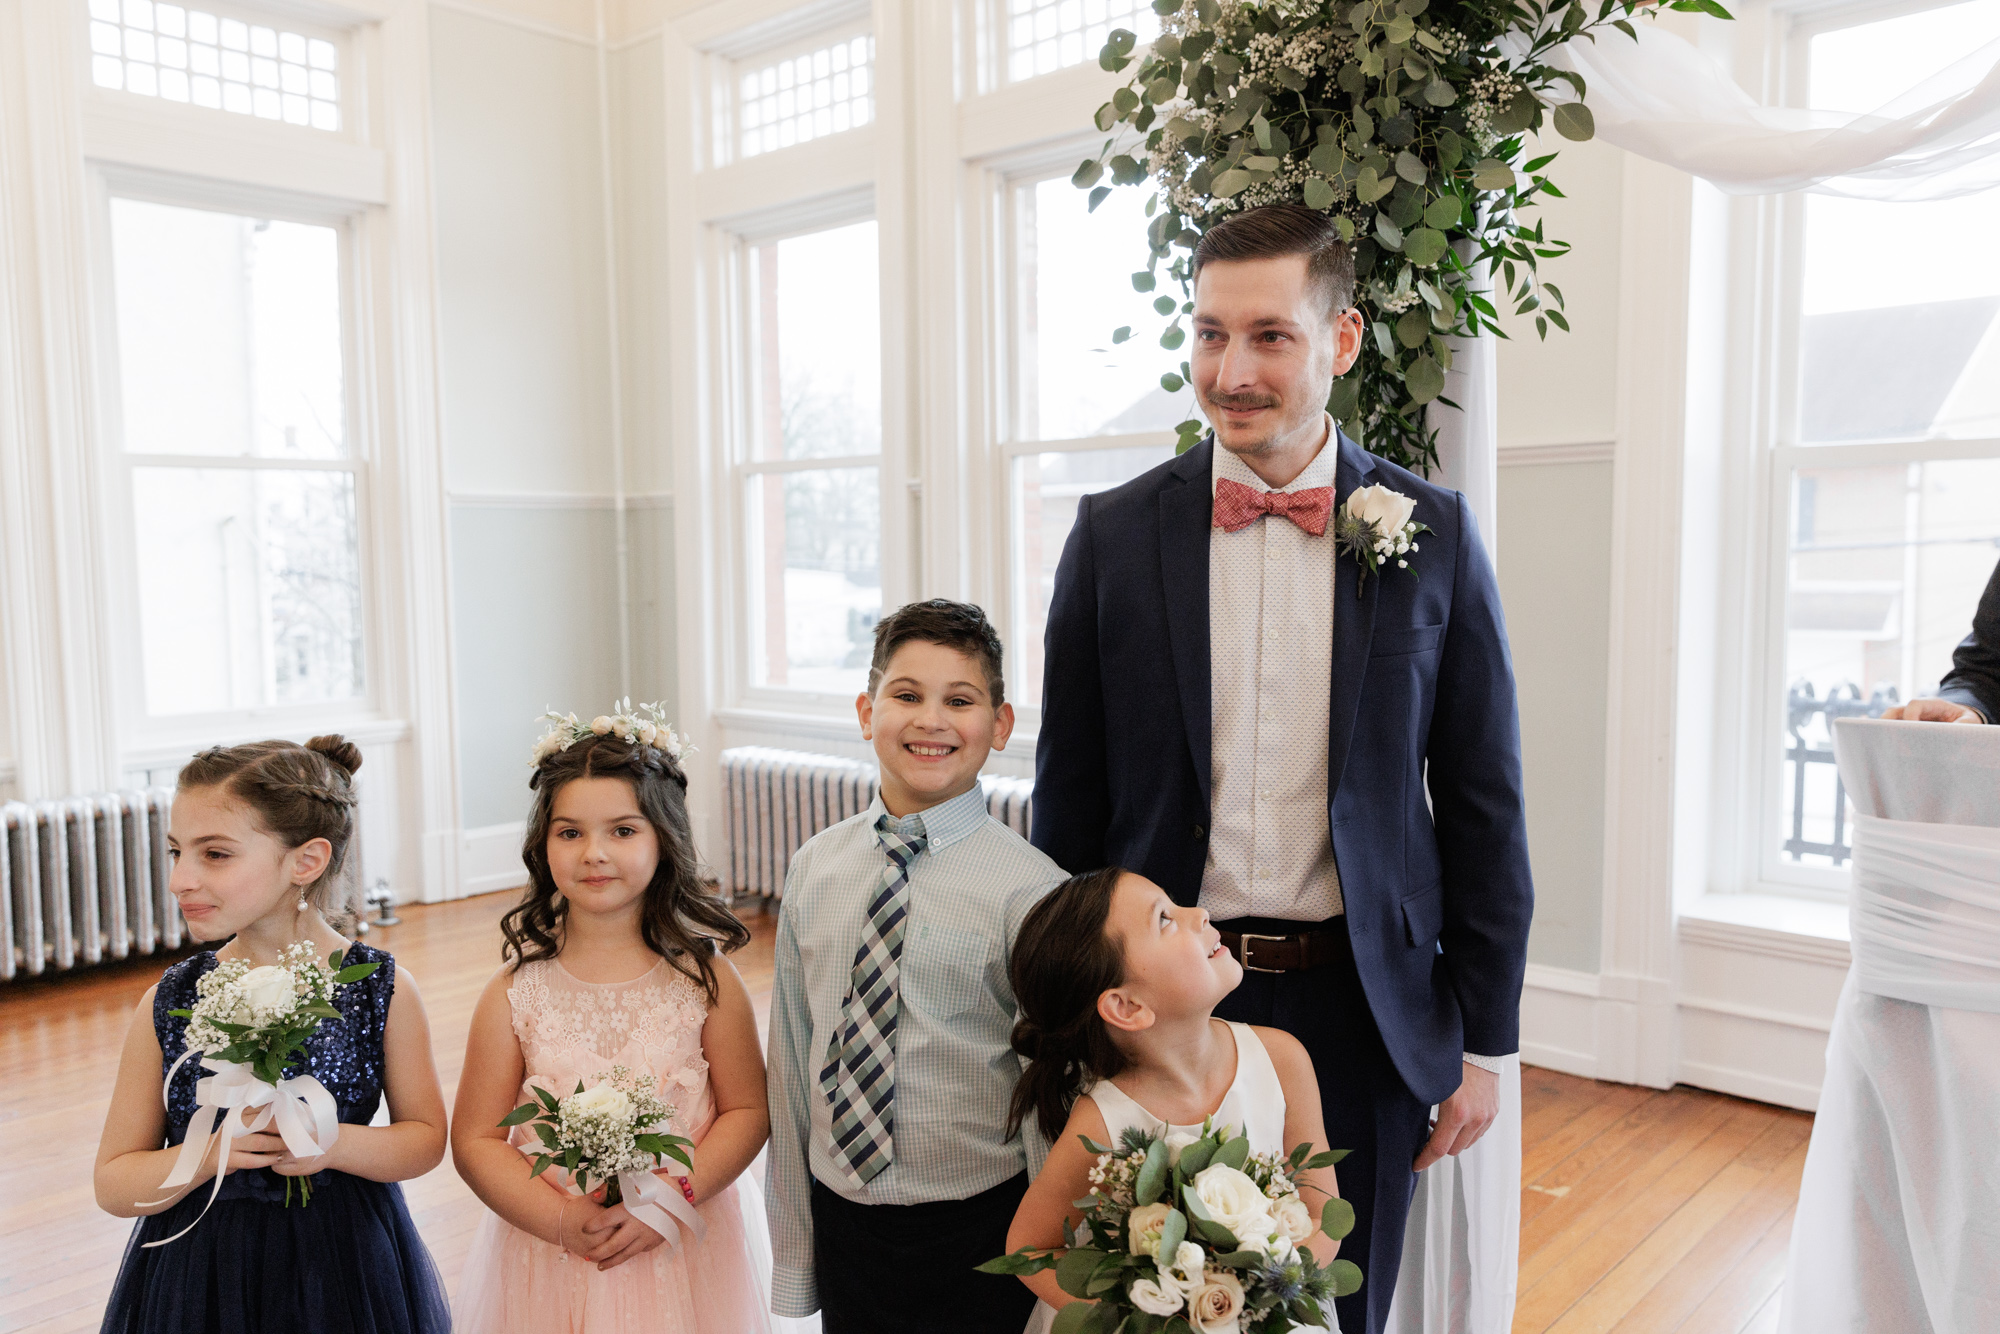 Elegant groom waits for the bride while surrounded by children in the wedding party at the altar during a wedding ceremony at Old City Hall in Bordentown, NJ 